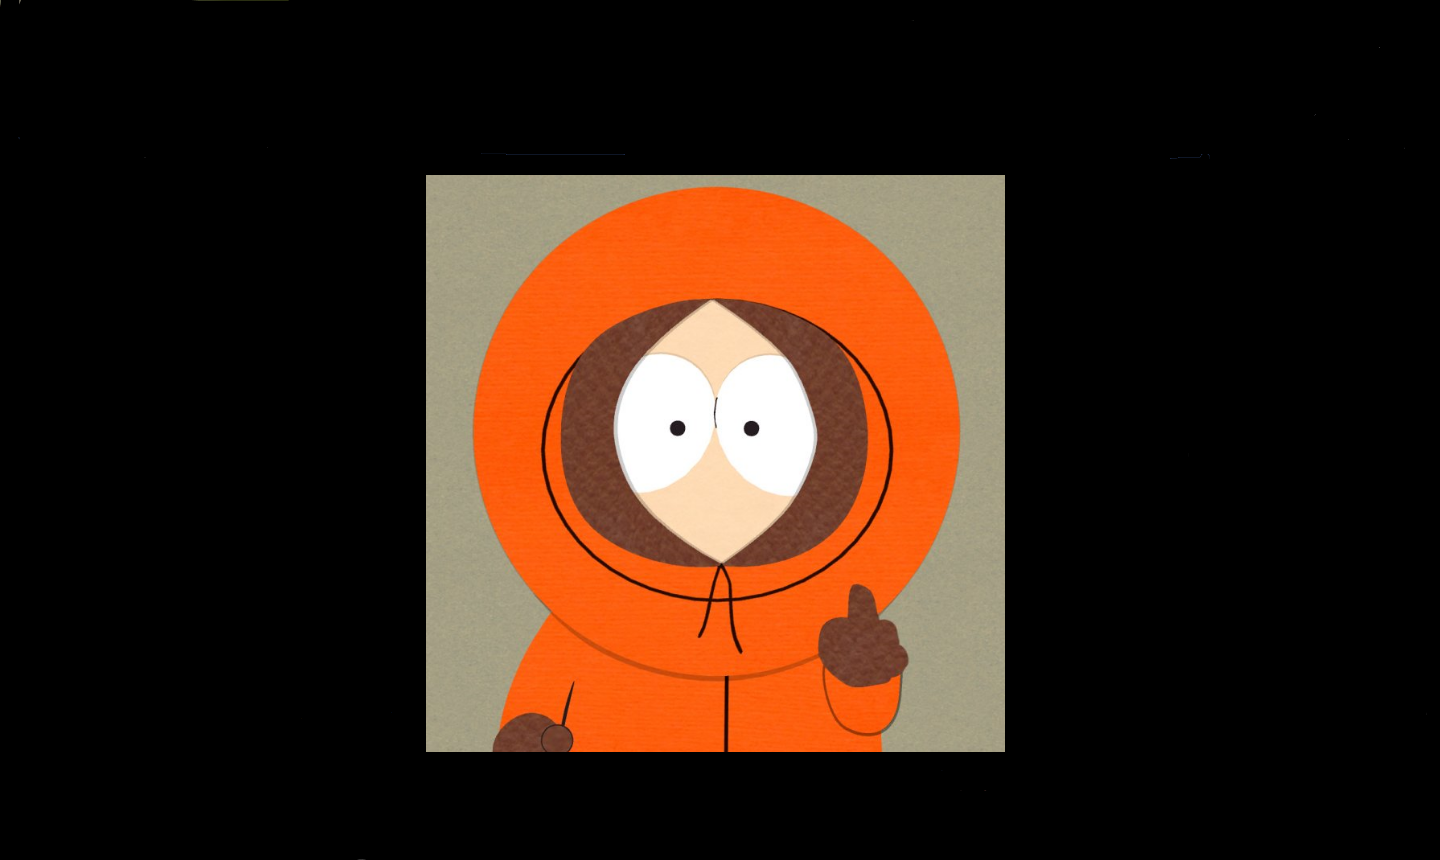 Kenny South Park Quotes.